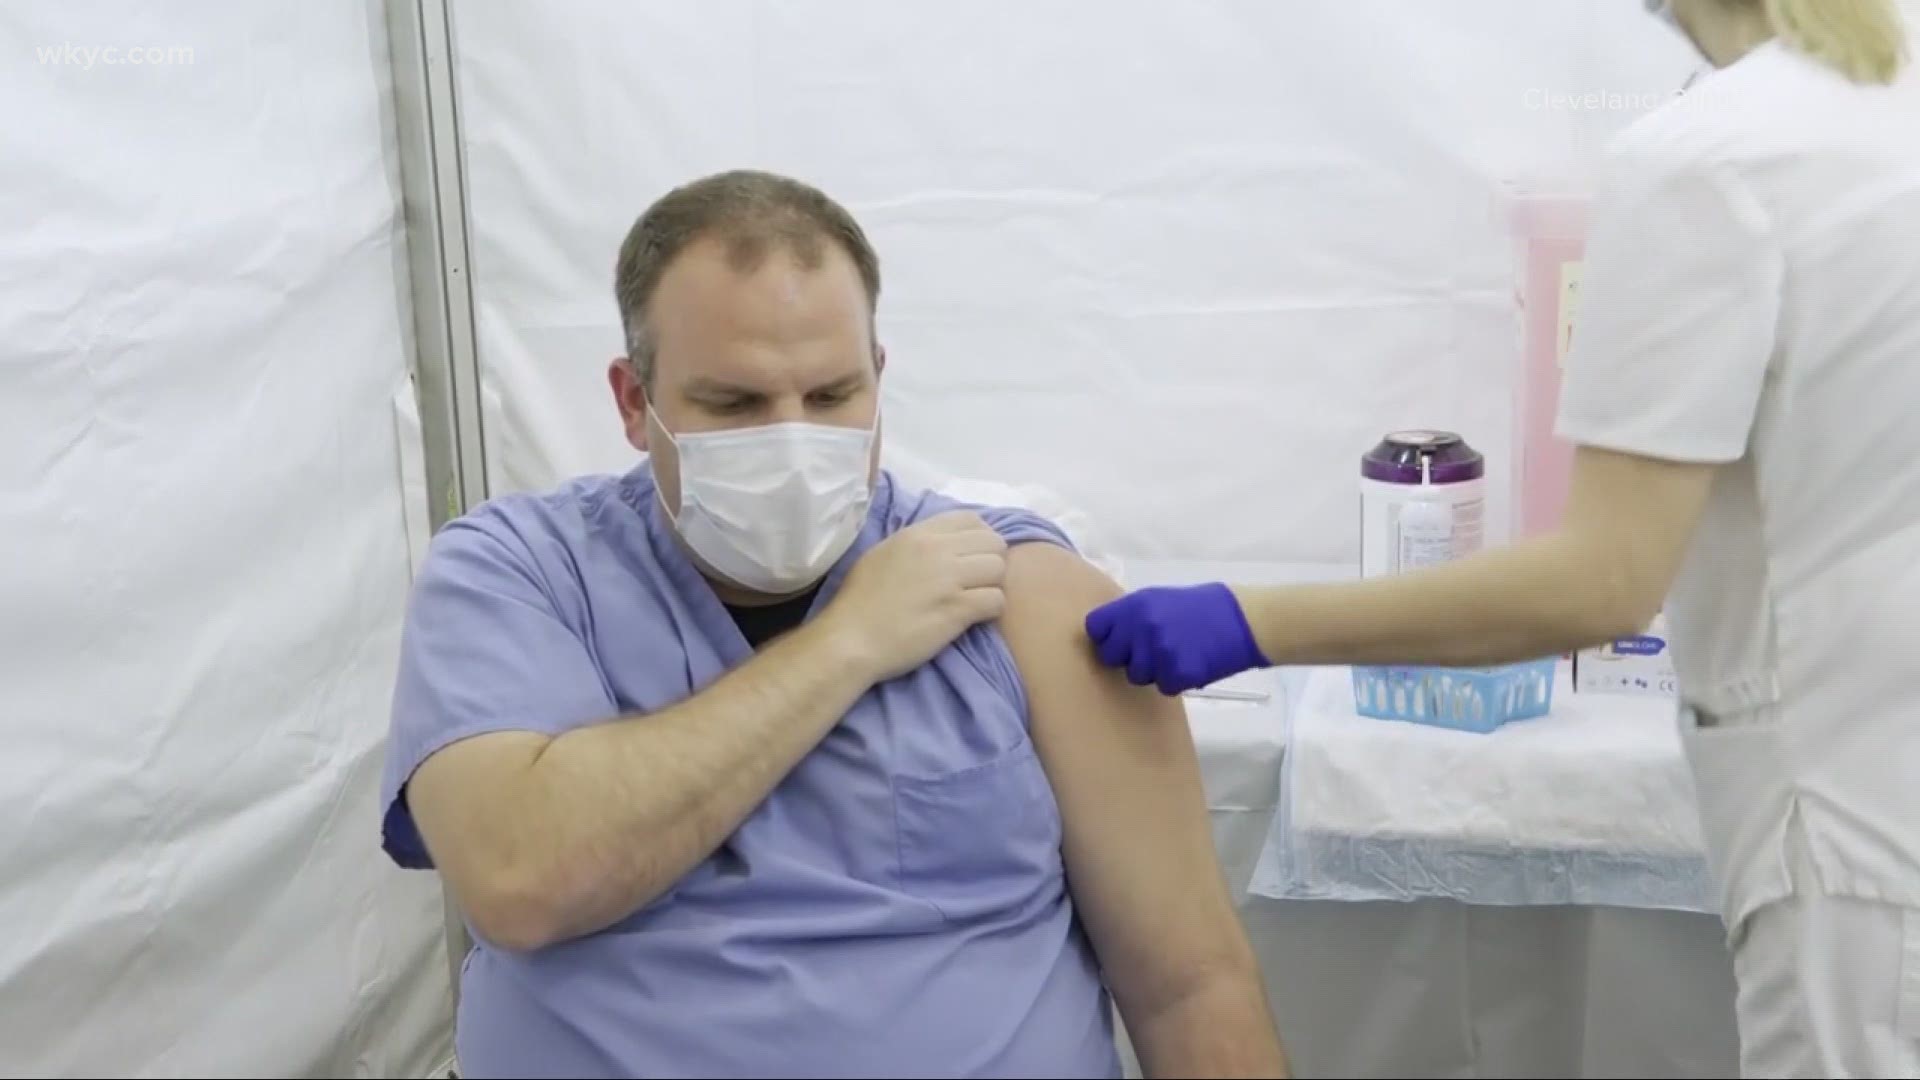 Dr. Turner rolled up his sleeve Friday and became vaccinated for the very virus he has spent nine months treating. Laura Caso reports.